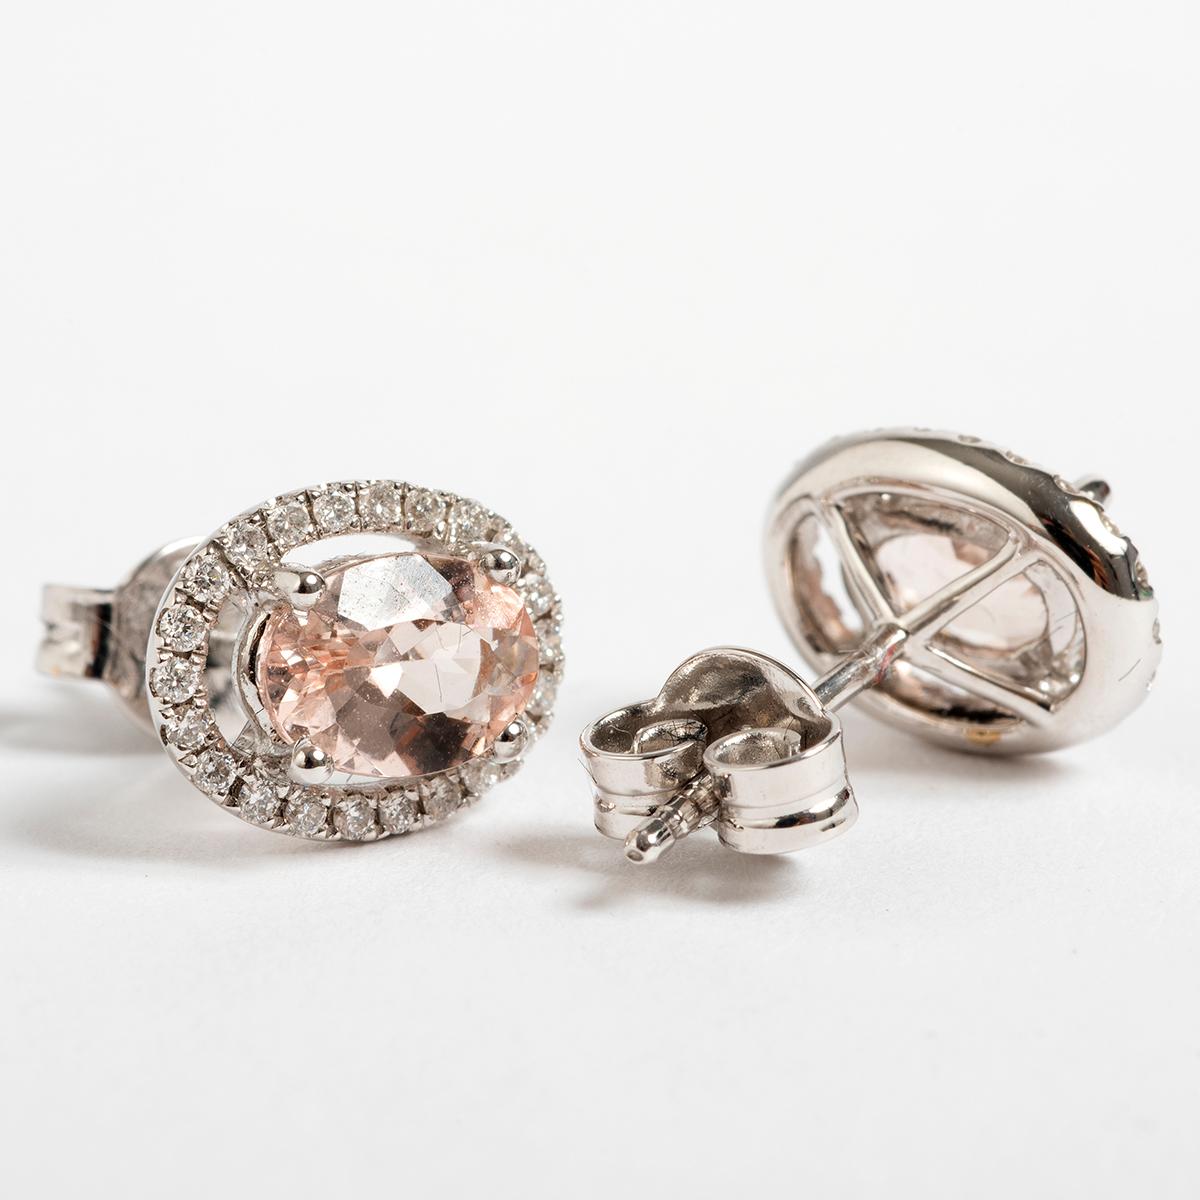 A unique piece within our carefully curated Vintage & Prestige fine jewellery collection, we are delighted to present the following: These pretty diamond and morganite earrings are set in 18 carat white gold. Measuring 8mm x 10mm.